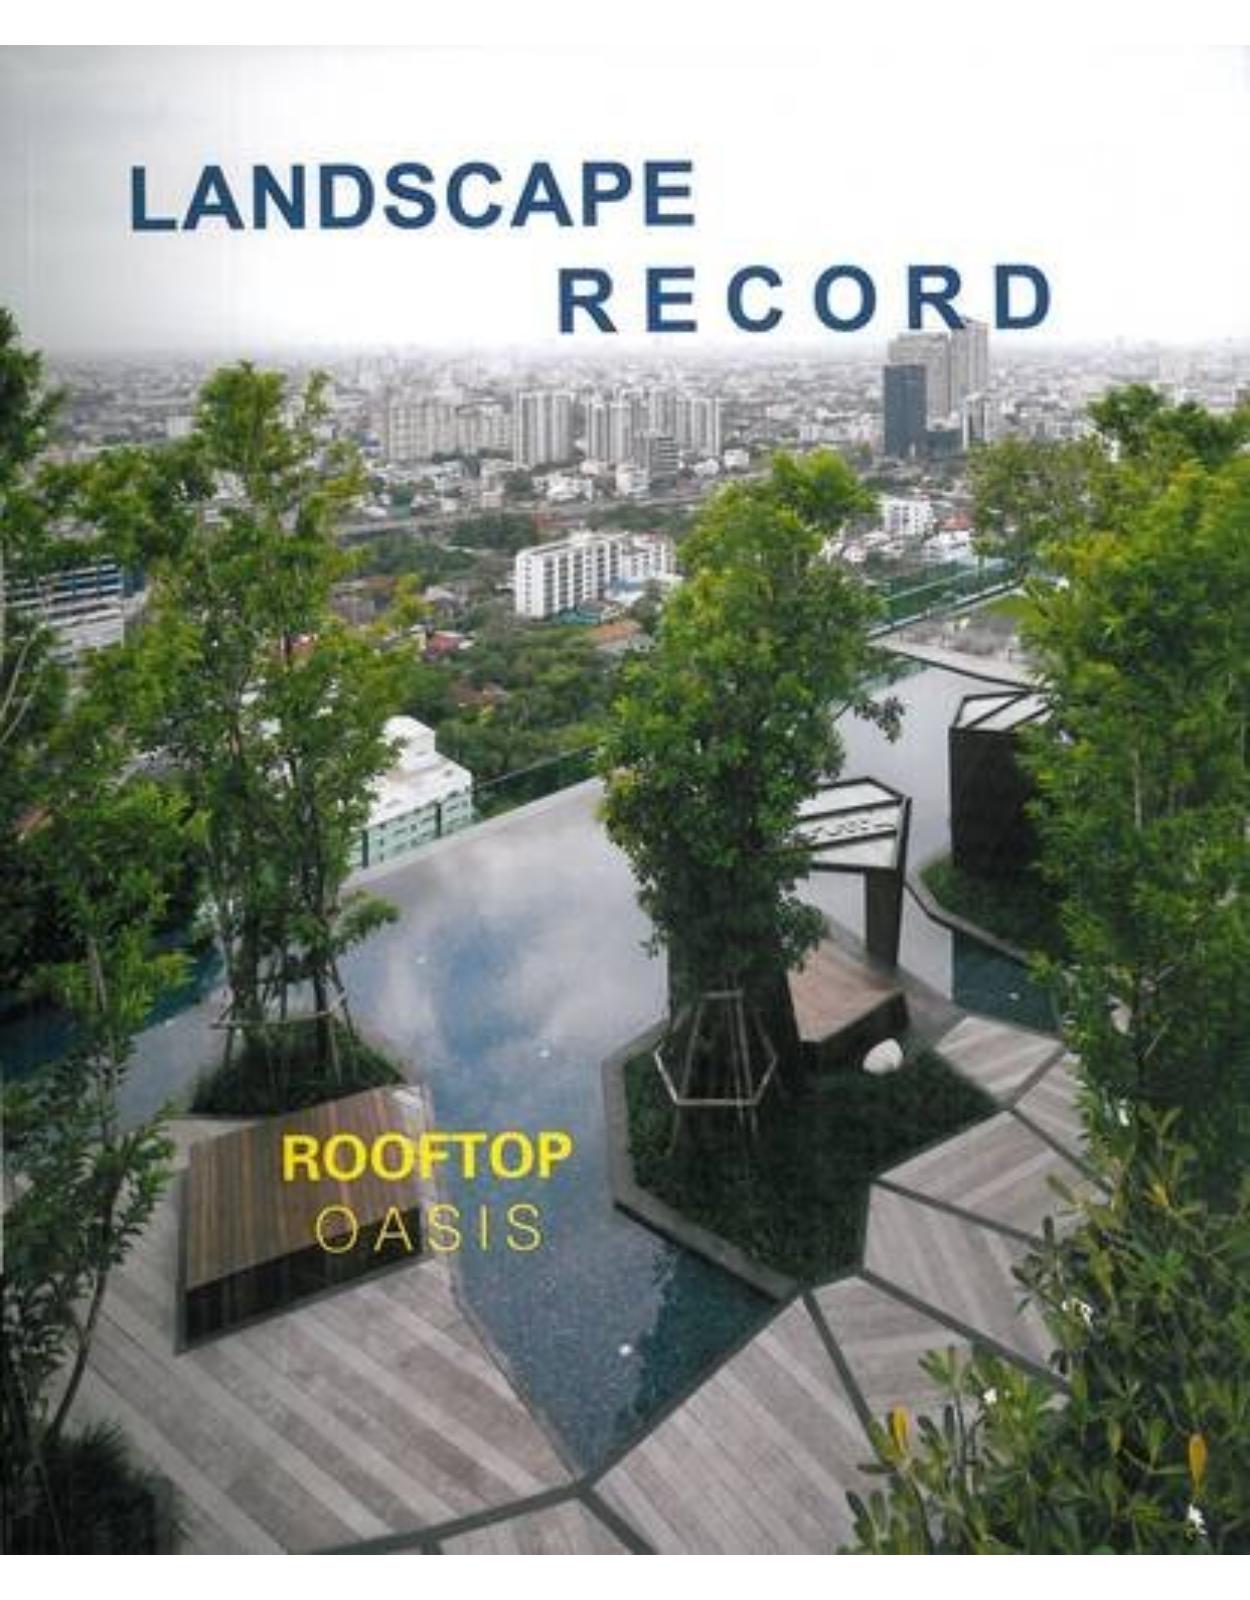 Landscape Record: Roof Oasis